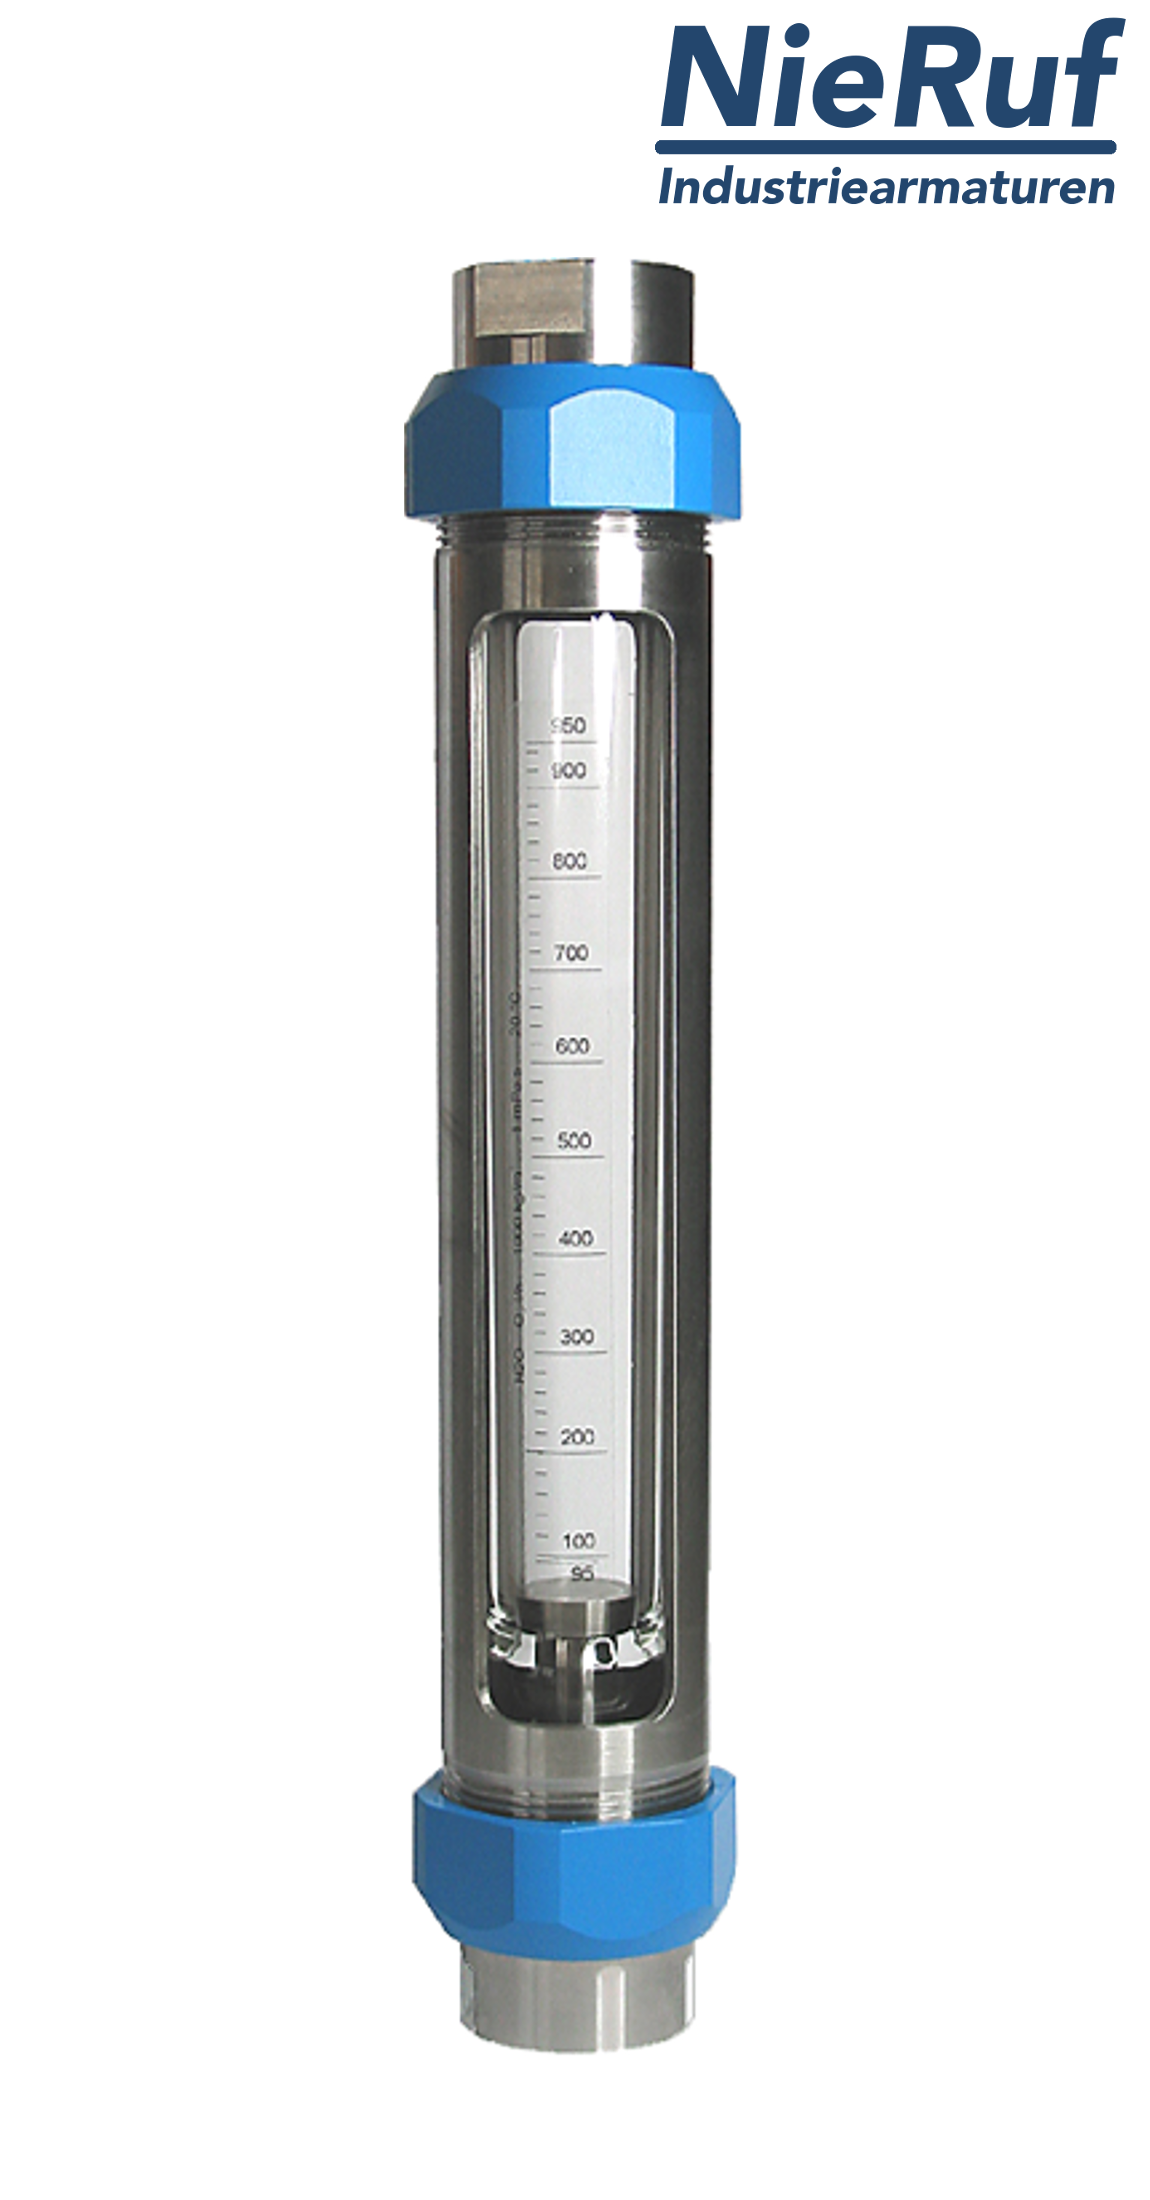 Variable area flowmeter stainless steel + borosilicate 1 1/2" inch 14000.0 - 140000.0 l/h air FKM